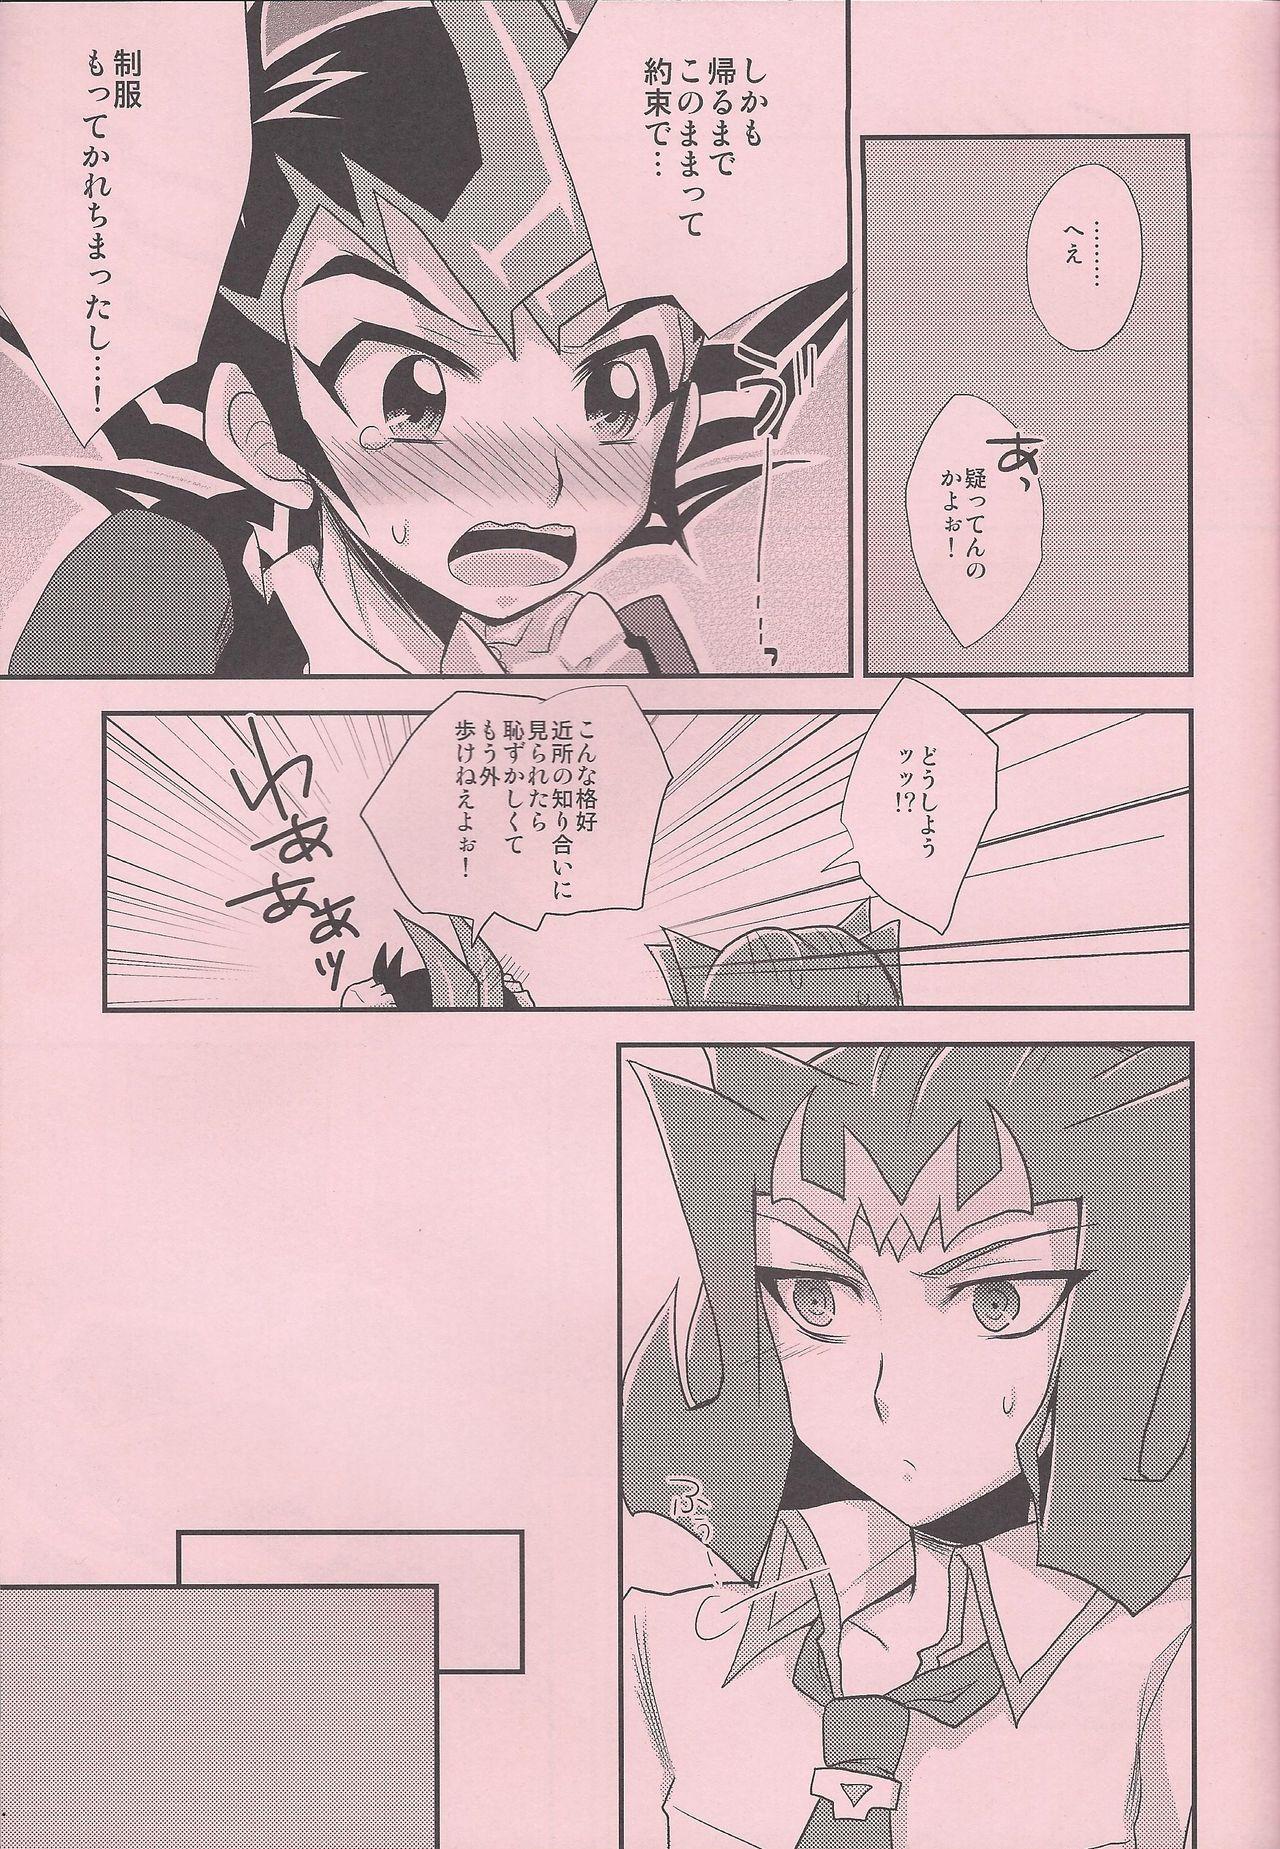 Tinder Maple Syrup - Yu gi oh zexal Girlfriends - Page 6